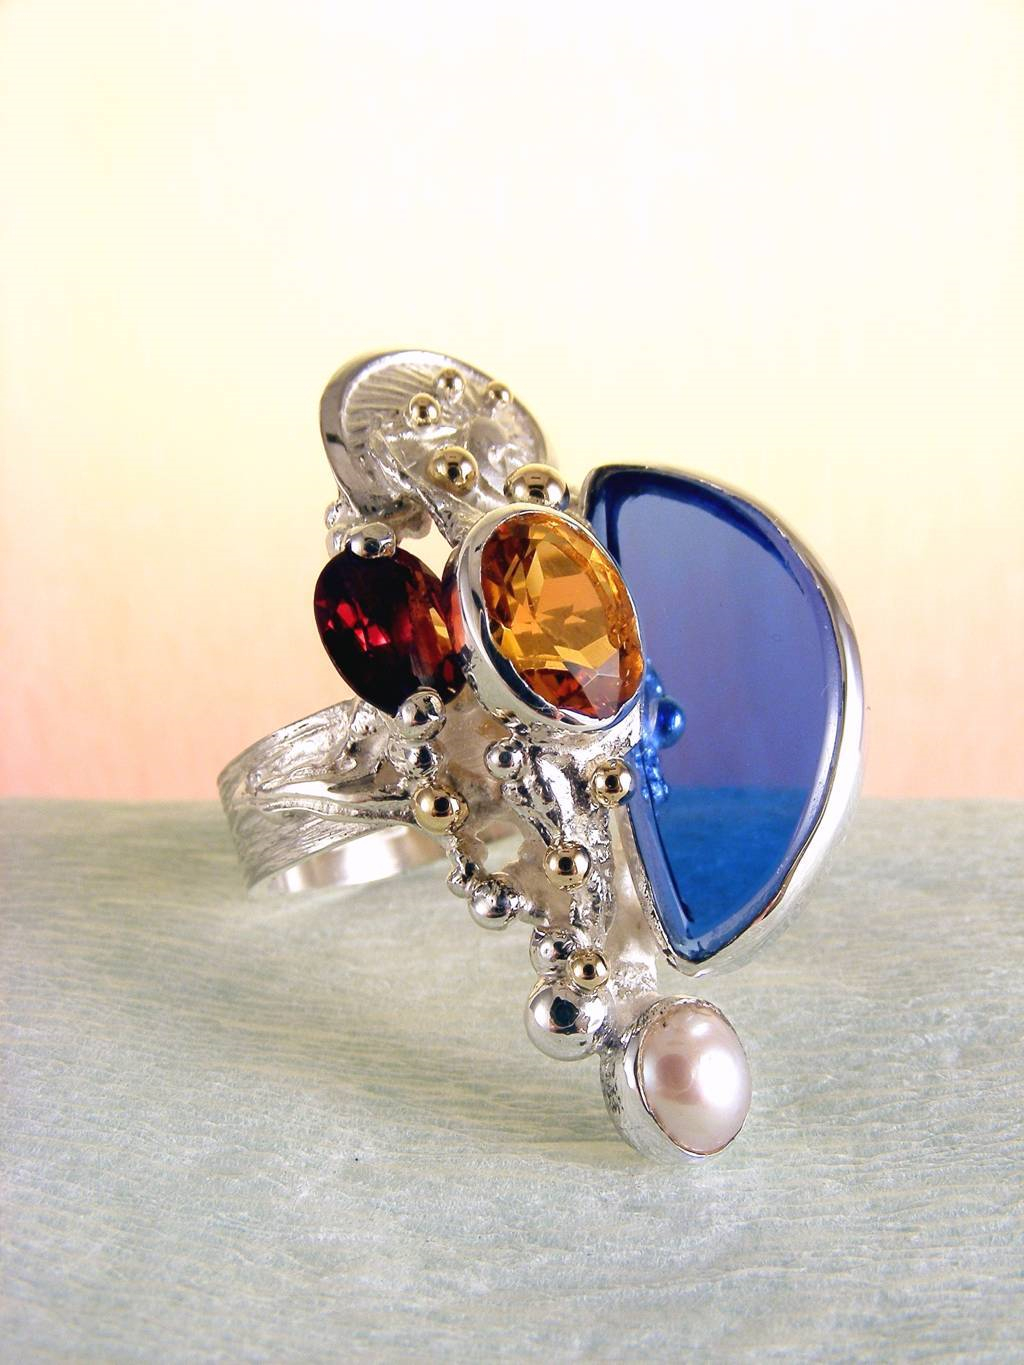 original maker's handcrafted jewellery, gregory pyra piro ring 3624, sterling silver, gold, citrine, garnet, pearl, glass, art nouveau inspired fashion jewelry, handcrafted jewelry with antique motif, where to find art nouveau inspired fashion jewelry, fine jewellery instpired by retro fashion, jewellery and antique shops, shop for antiques and jewellery, shop for vintage jewellery, are there still artists and designers who make jewelry the old fashioned way, where to find contemporary jewelry with an antique motif, art and craft gallery artisan handcrafted jewellery for sale, jewellery with ocean and seashell theme